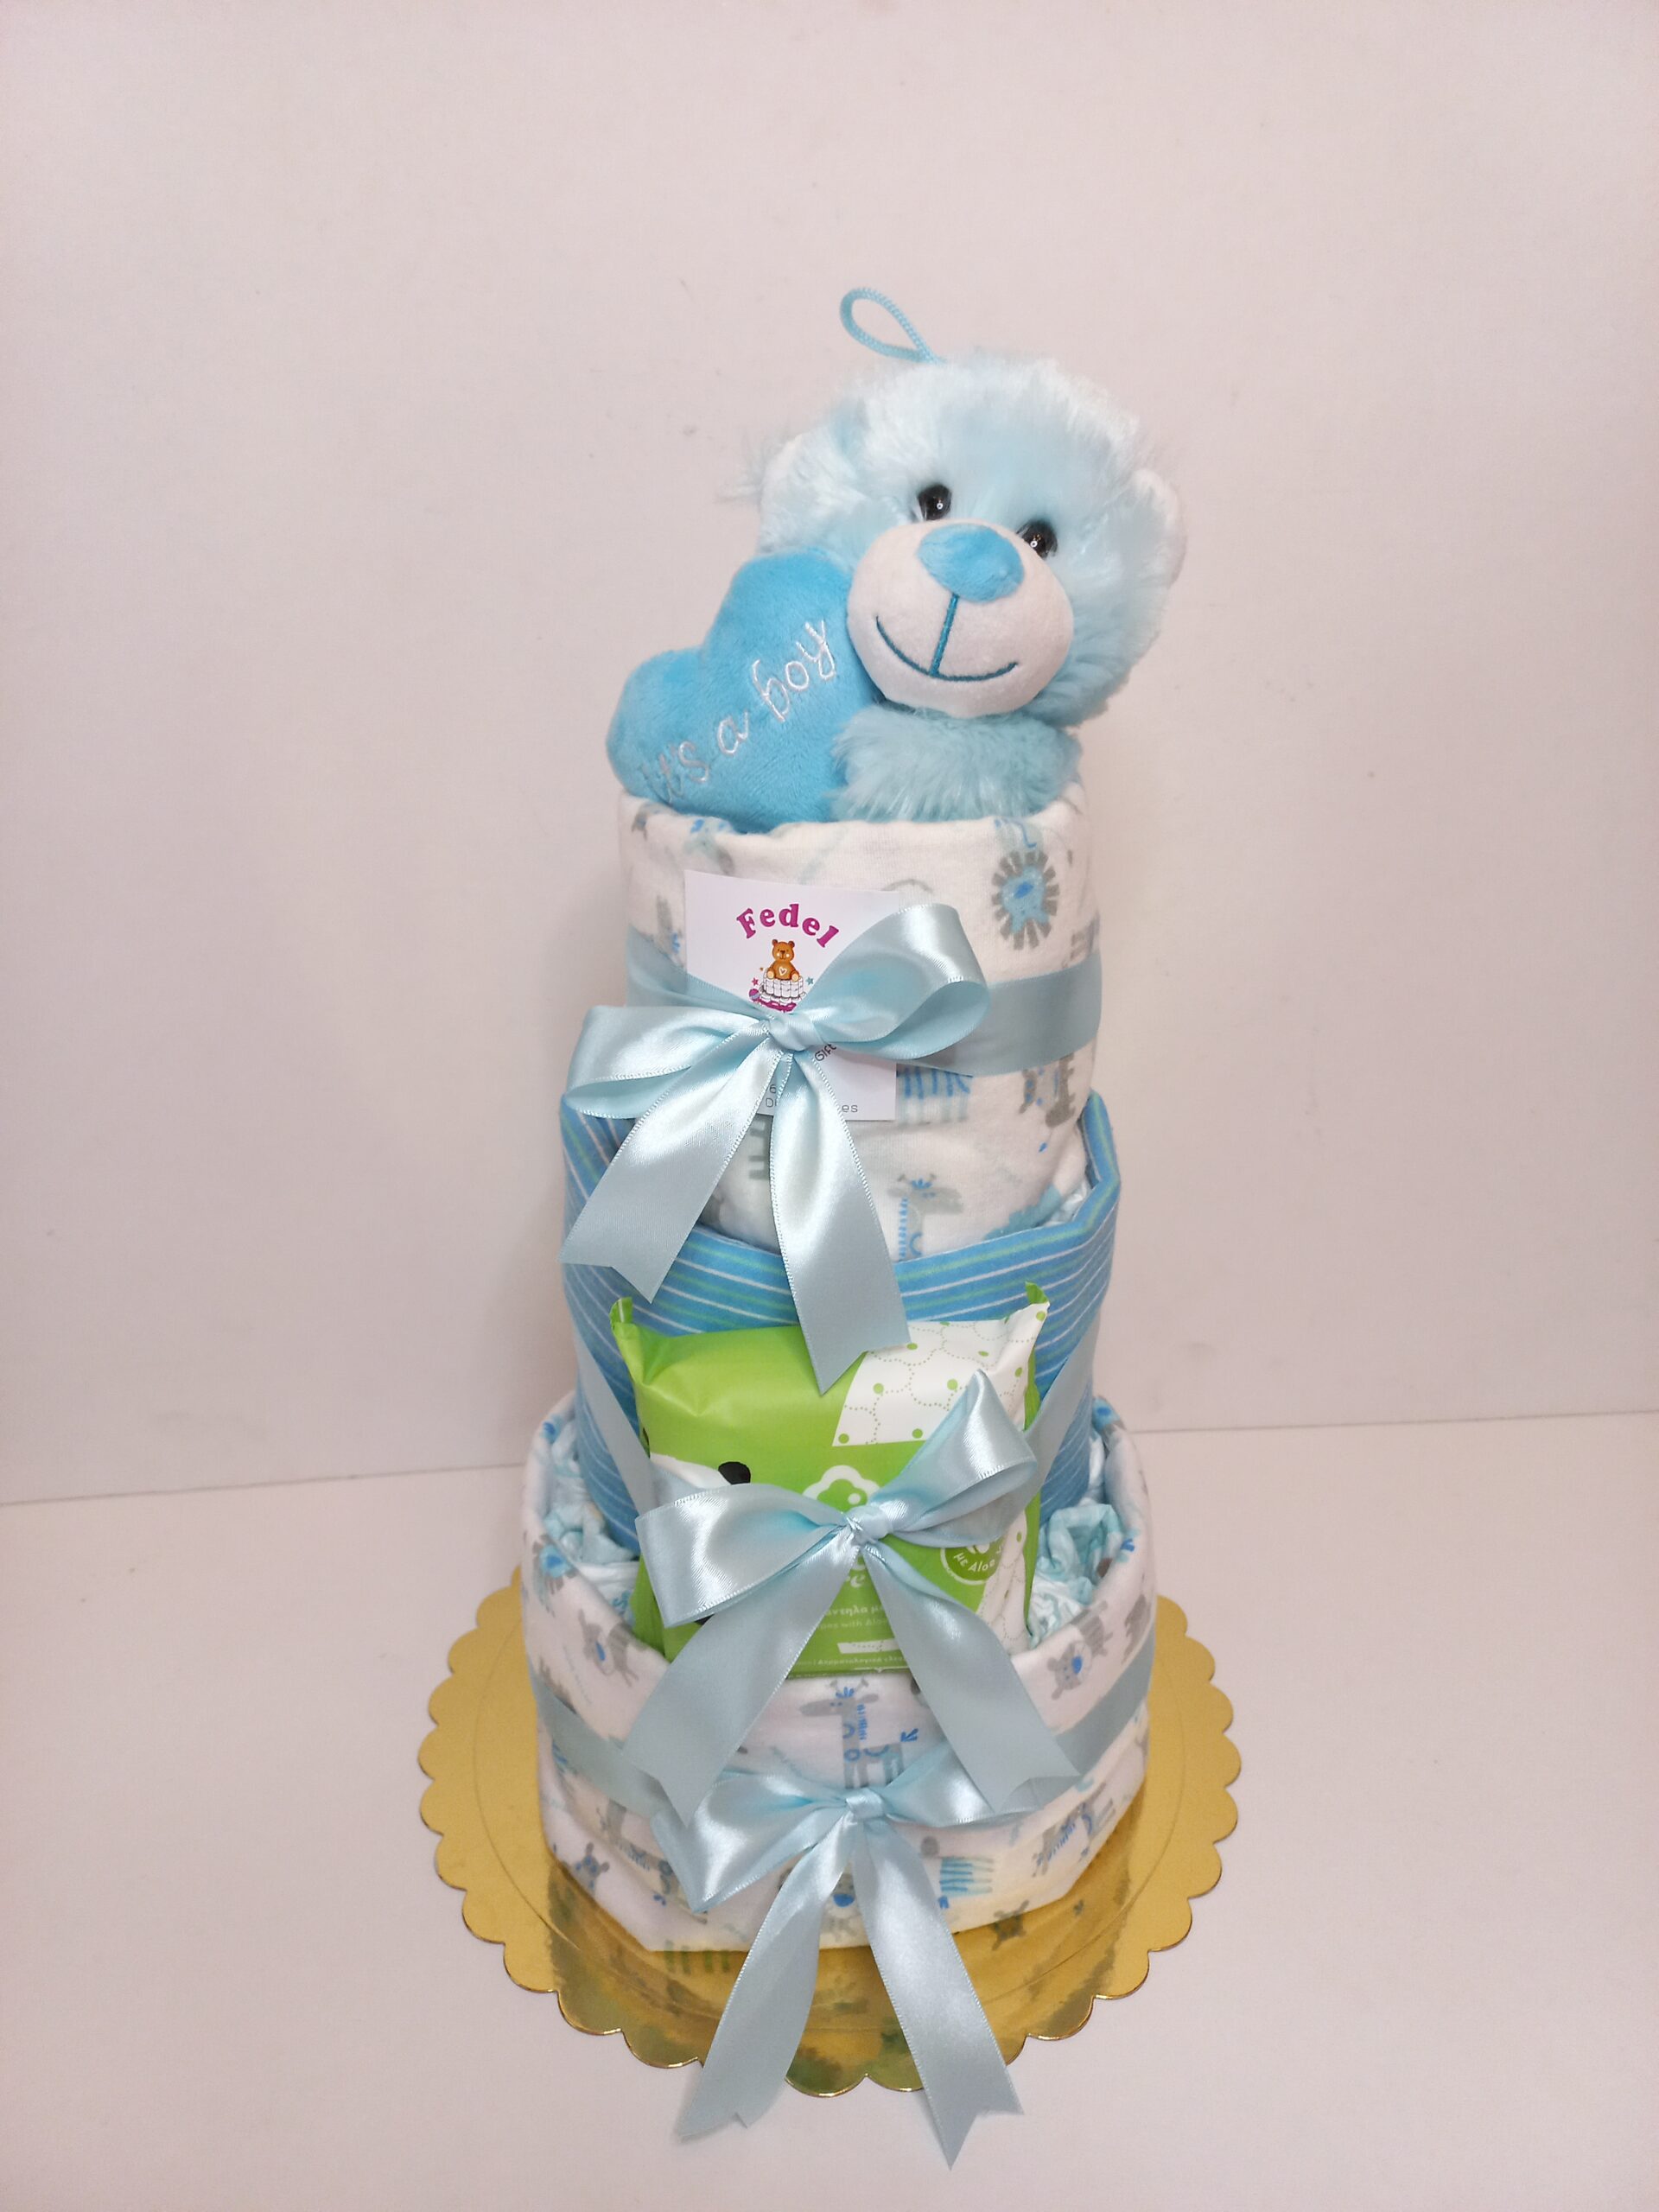 Lil' Moose Diaper Cake for Boys exclusively at Lil' Baby Cakes